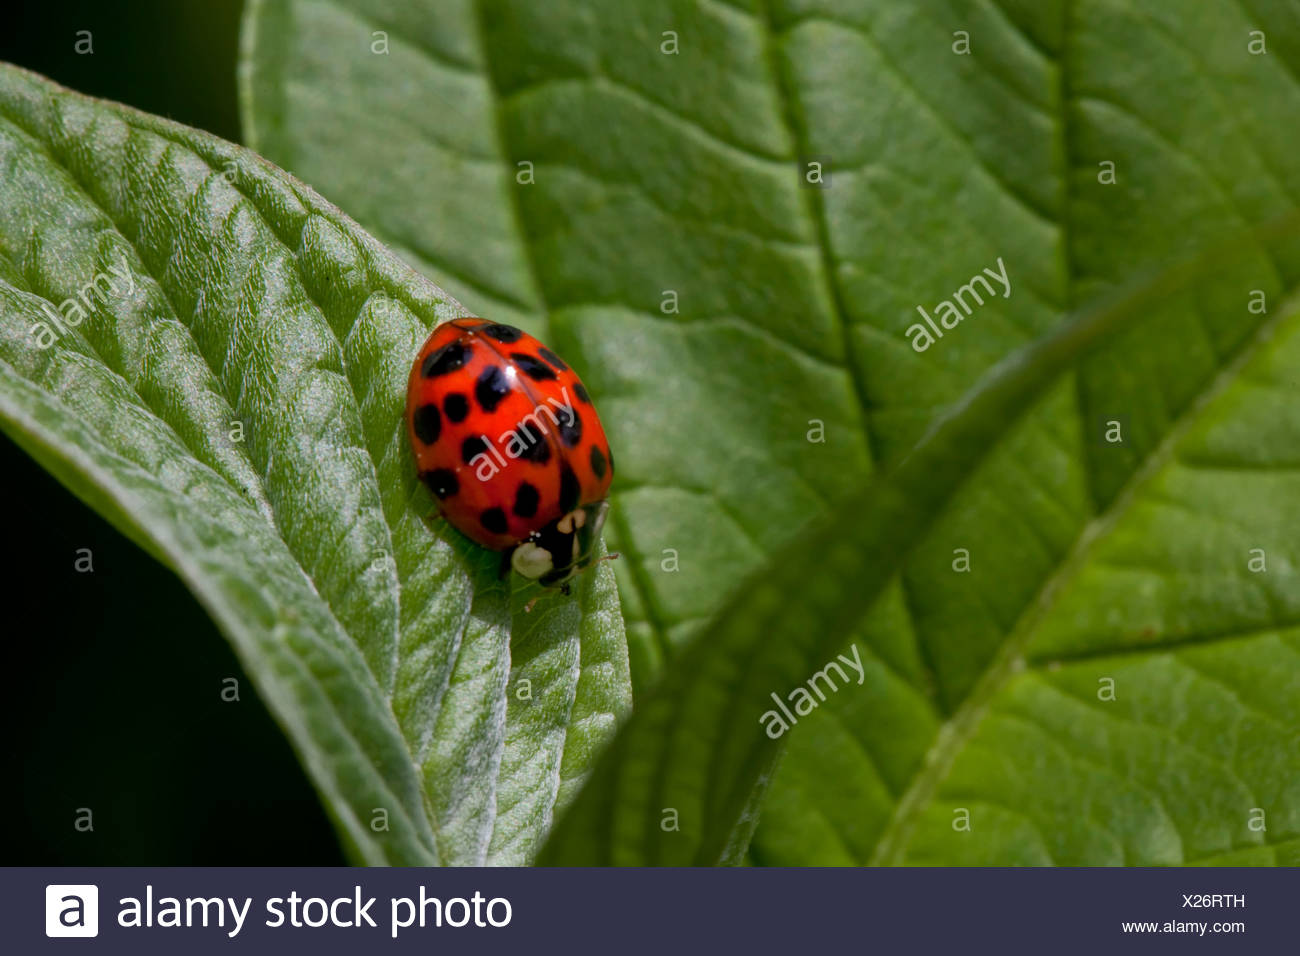 Ladybugs Red Luck Happy Lucky Charm Insect Insects Garden